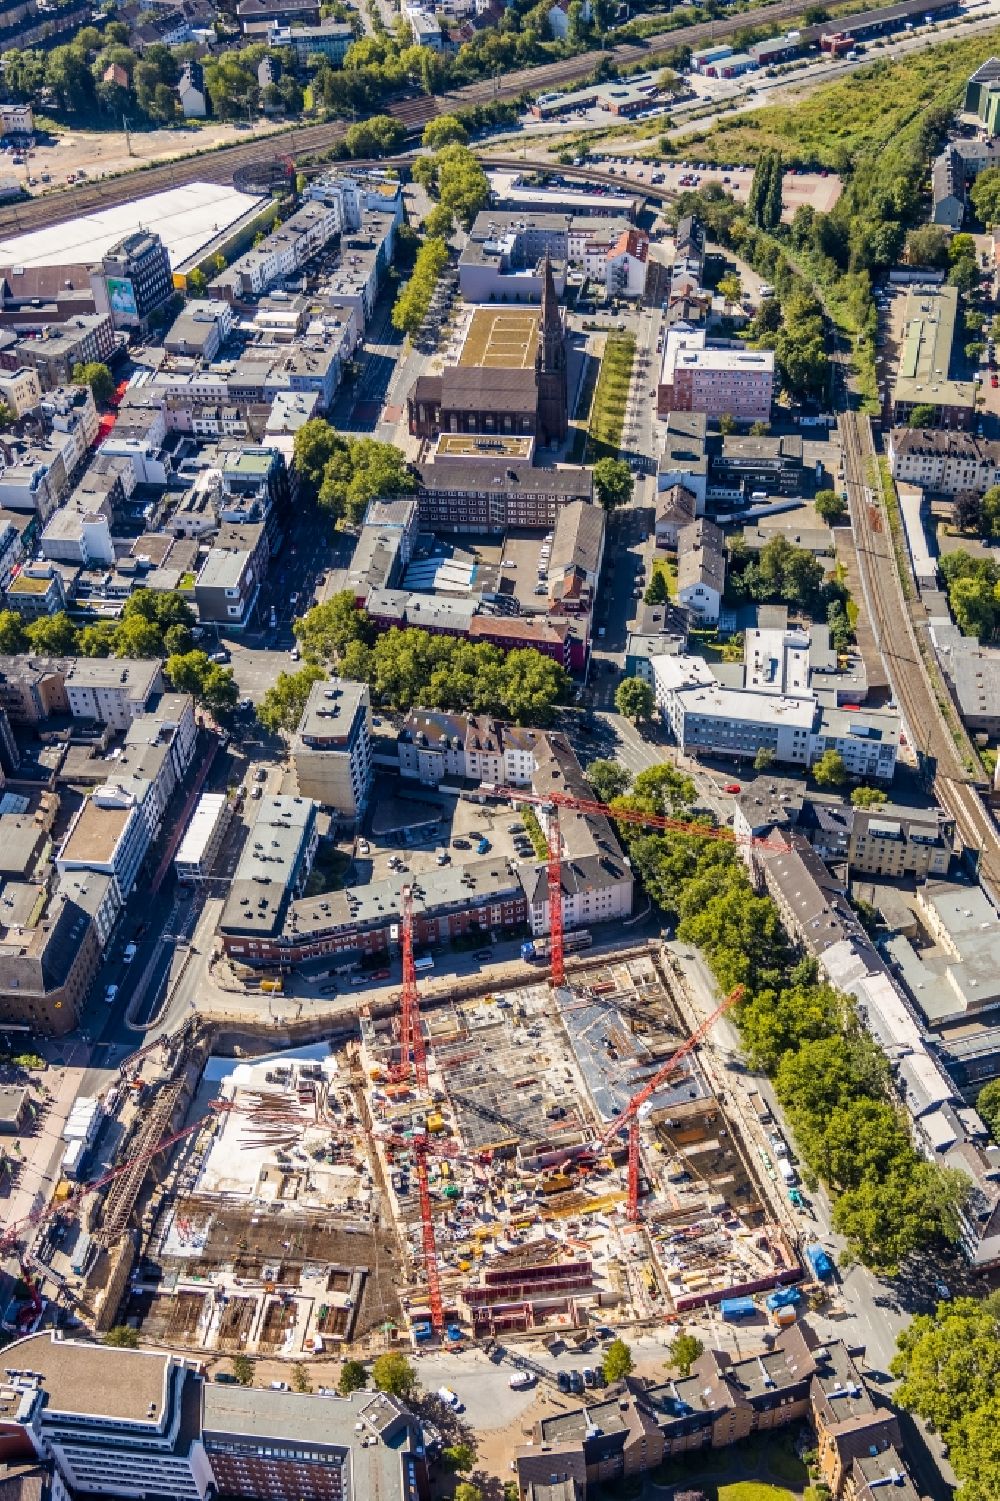 Aerial image Bochum - Construction site for the multi-family residential building Stadtquartier on Viktoriastrasse in the district Innenstadt in Bochum in the state North Rhine-Westphalia, Germany